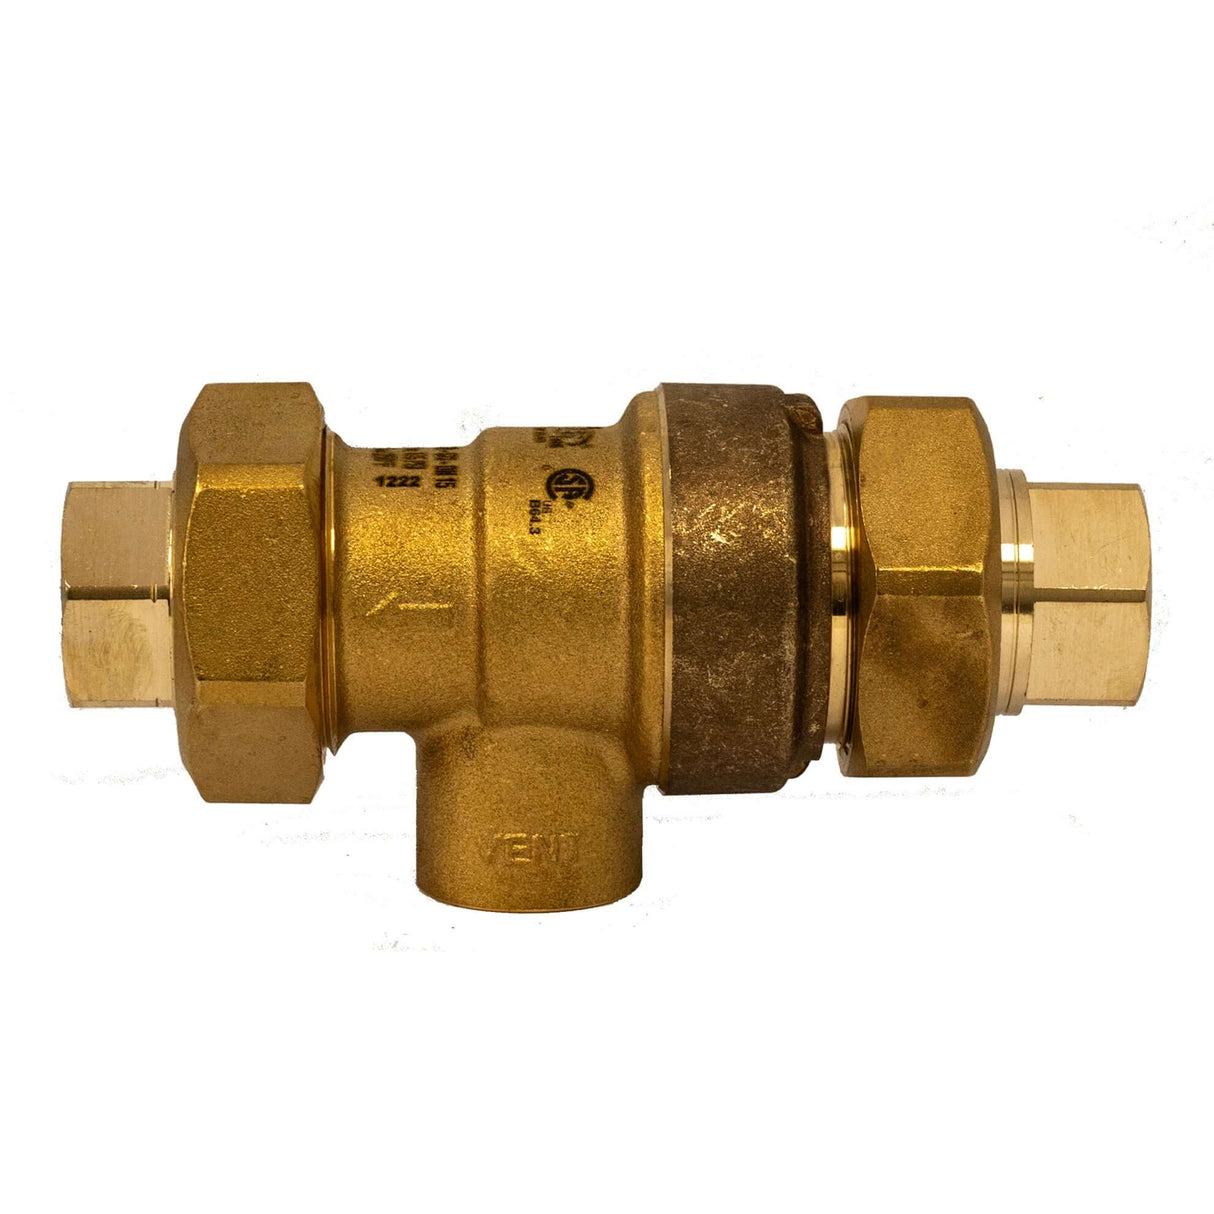 1/2" Union Dual check backflow preventer with atmospheric vent